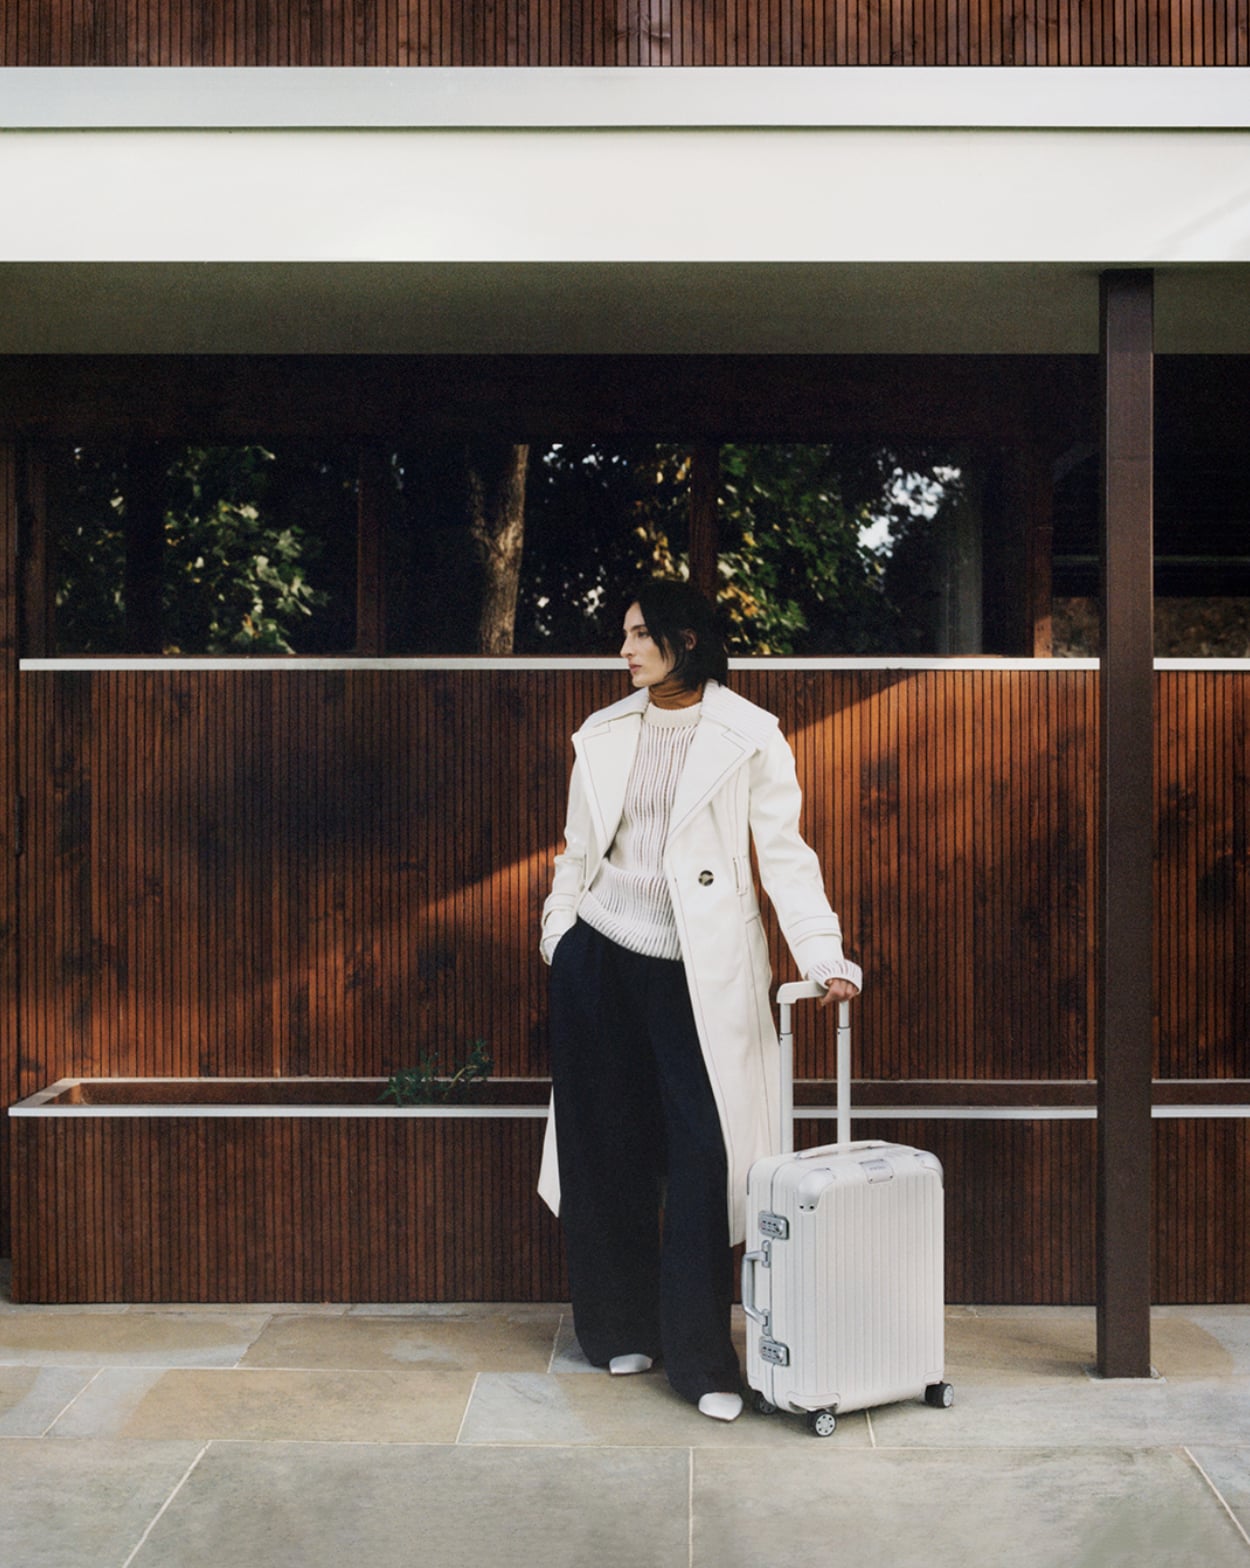 The Best Monos Luggage Pieces, Tested and Reviewed by a Travel Writer